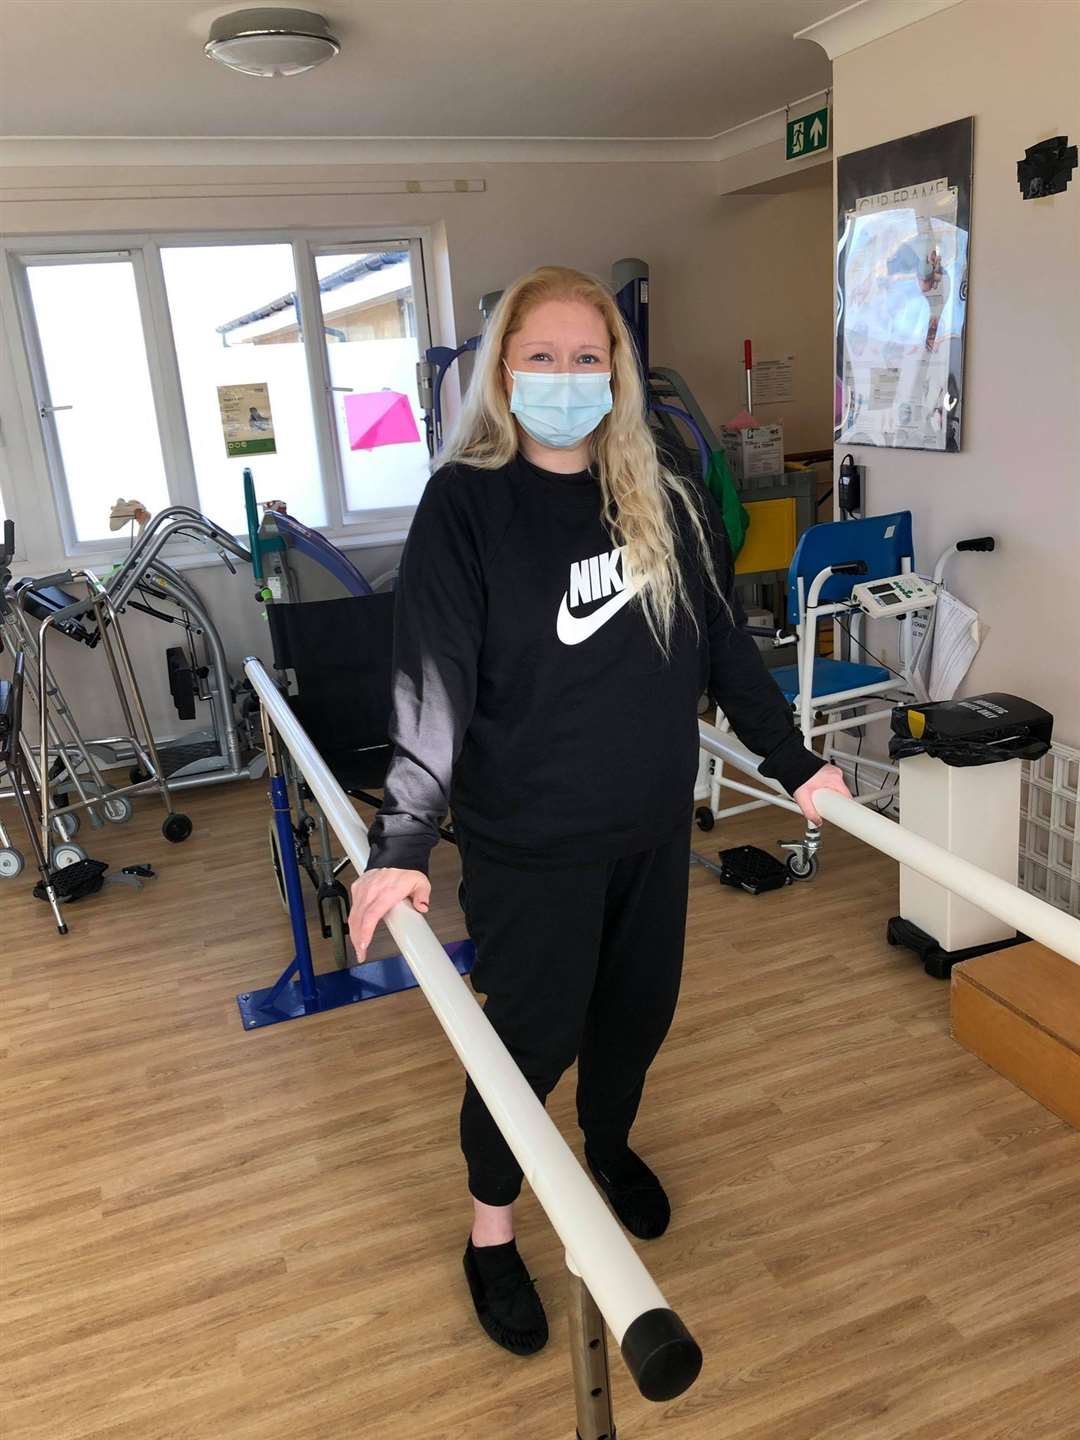 Kelly Cooney, 37, is having physiotherapy to help her walk again after suffering from paralysis as a result of Covid-19